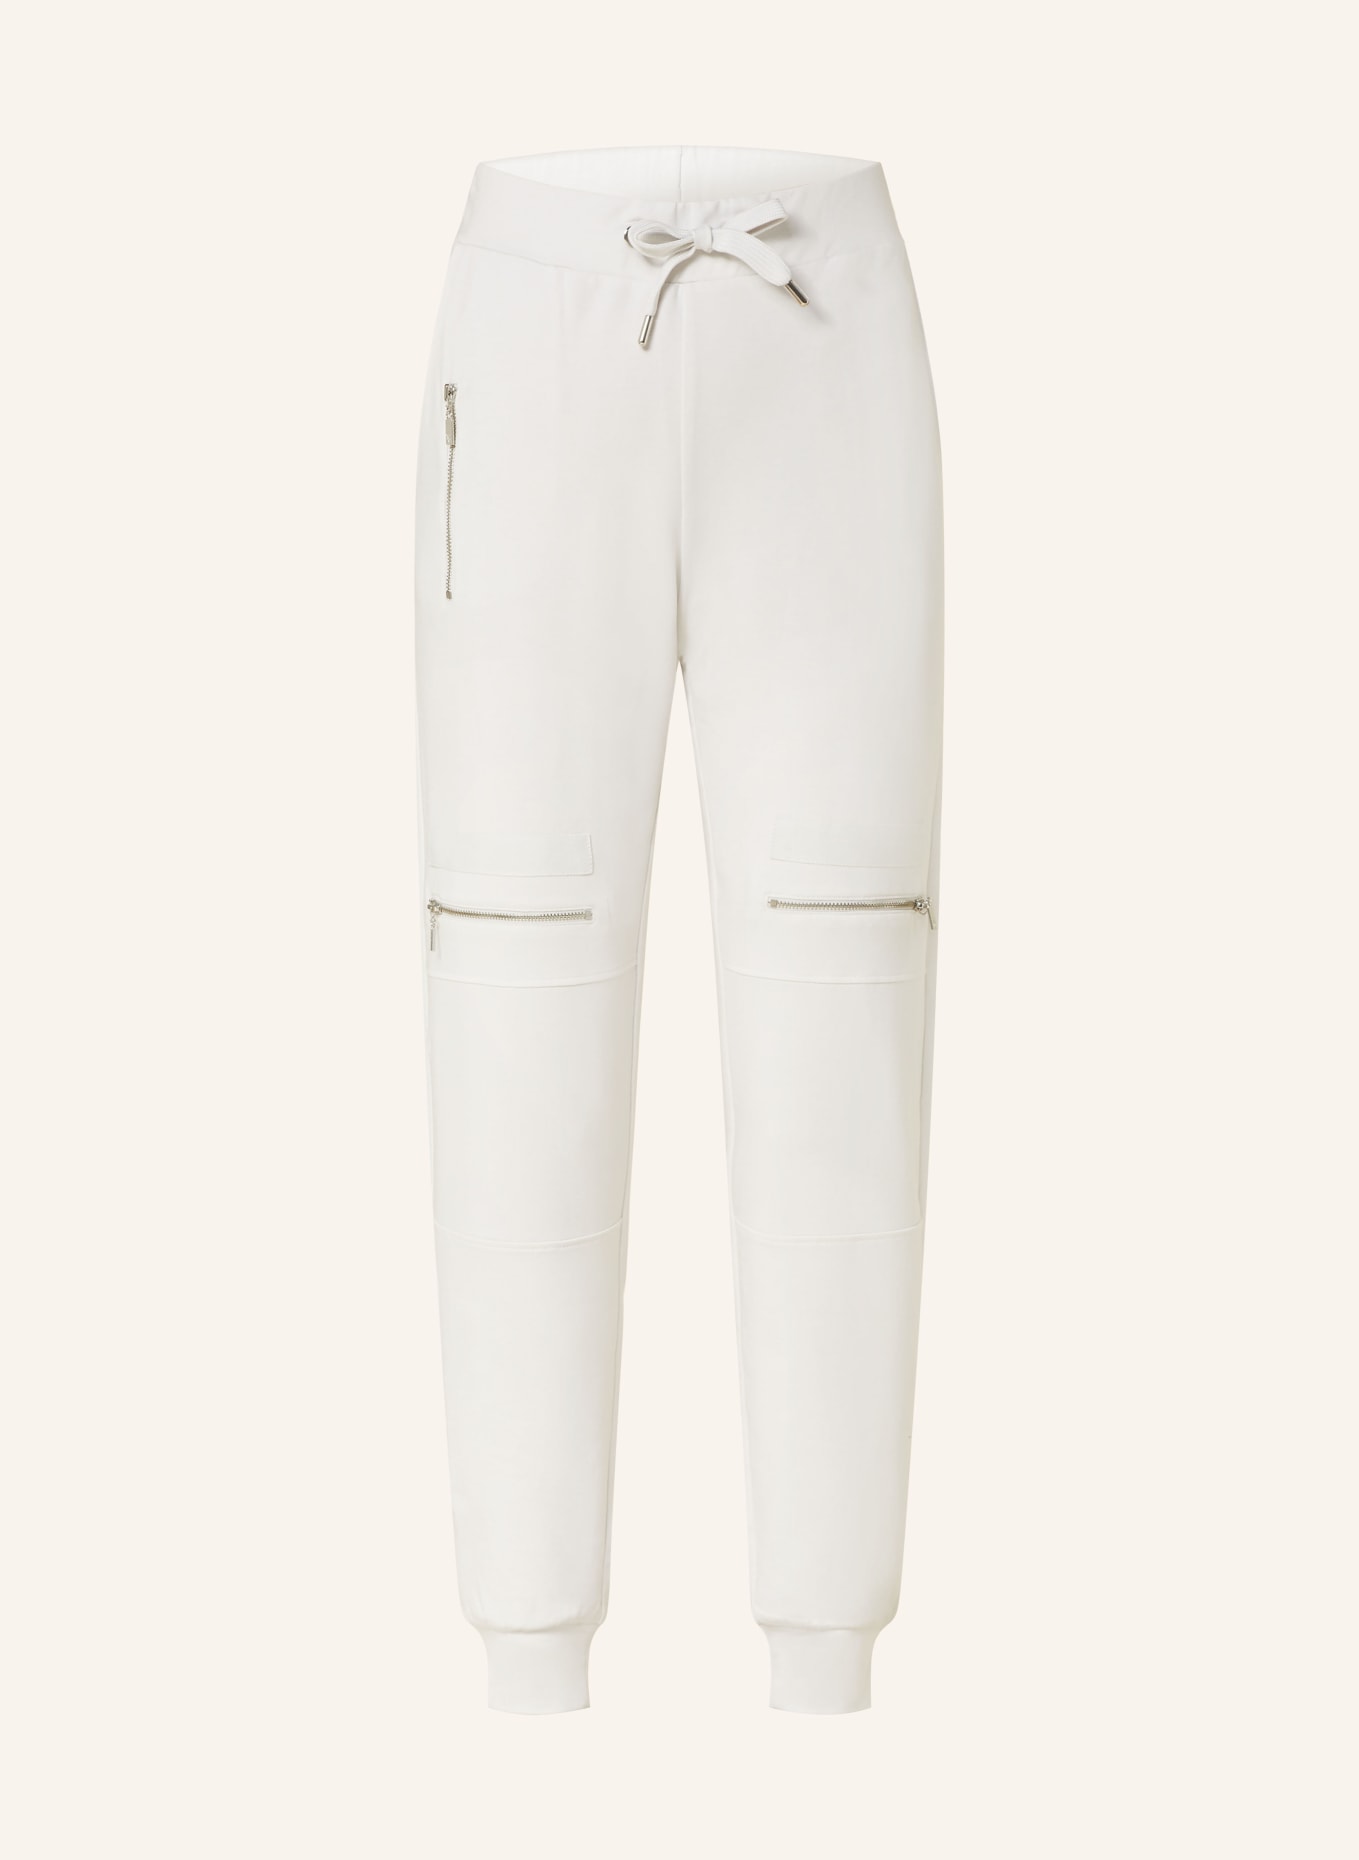 monari Jersey pants in jogger style, Color: LIGHT GRAY (Image 1)